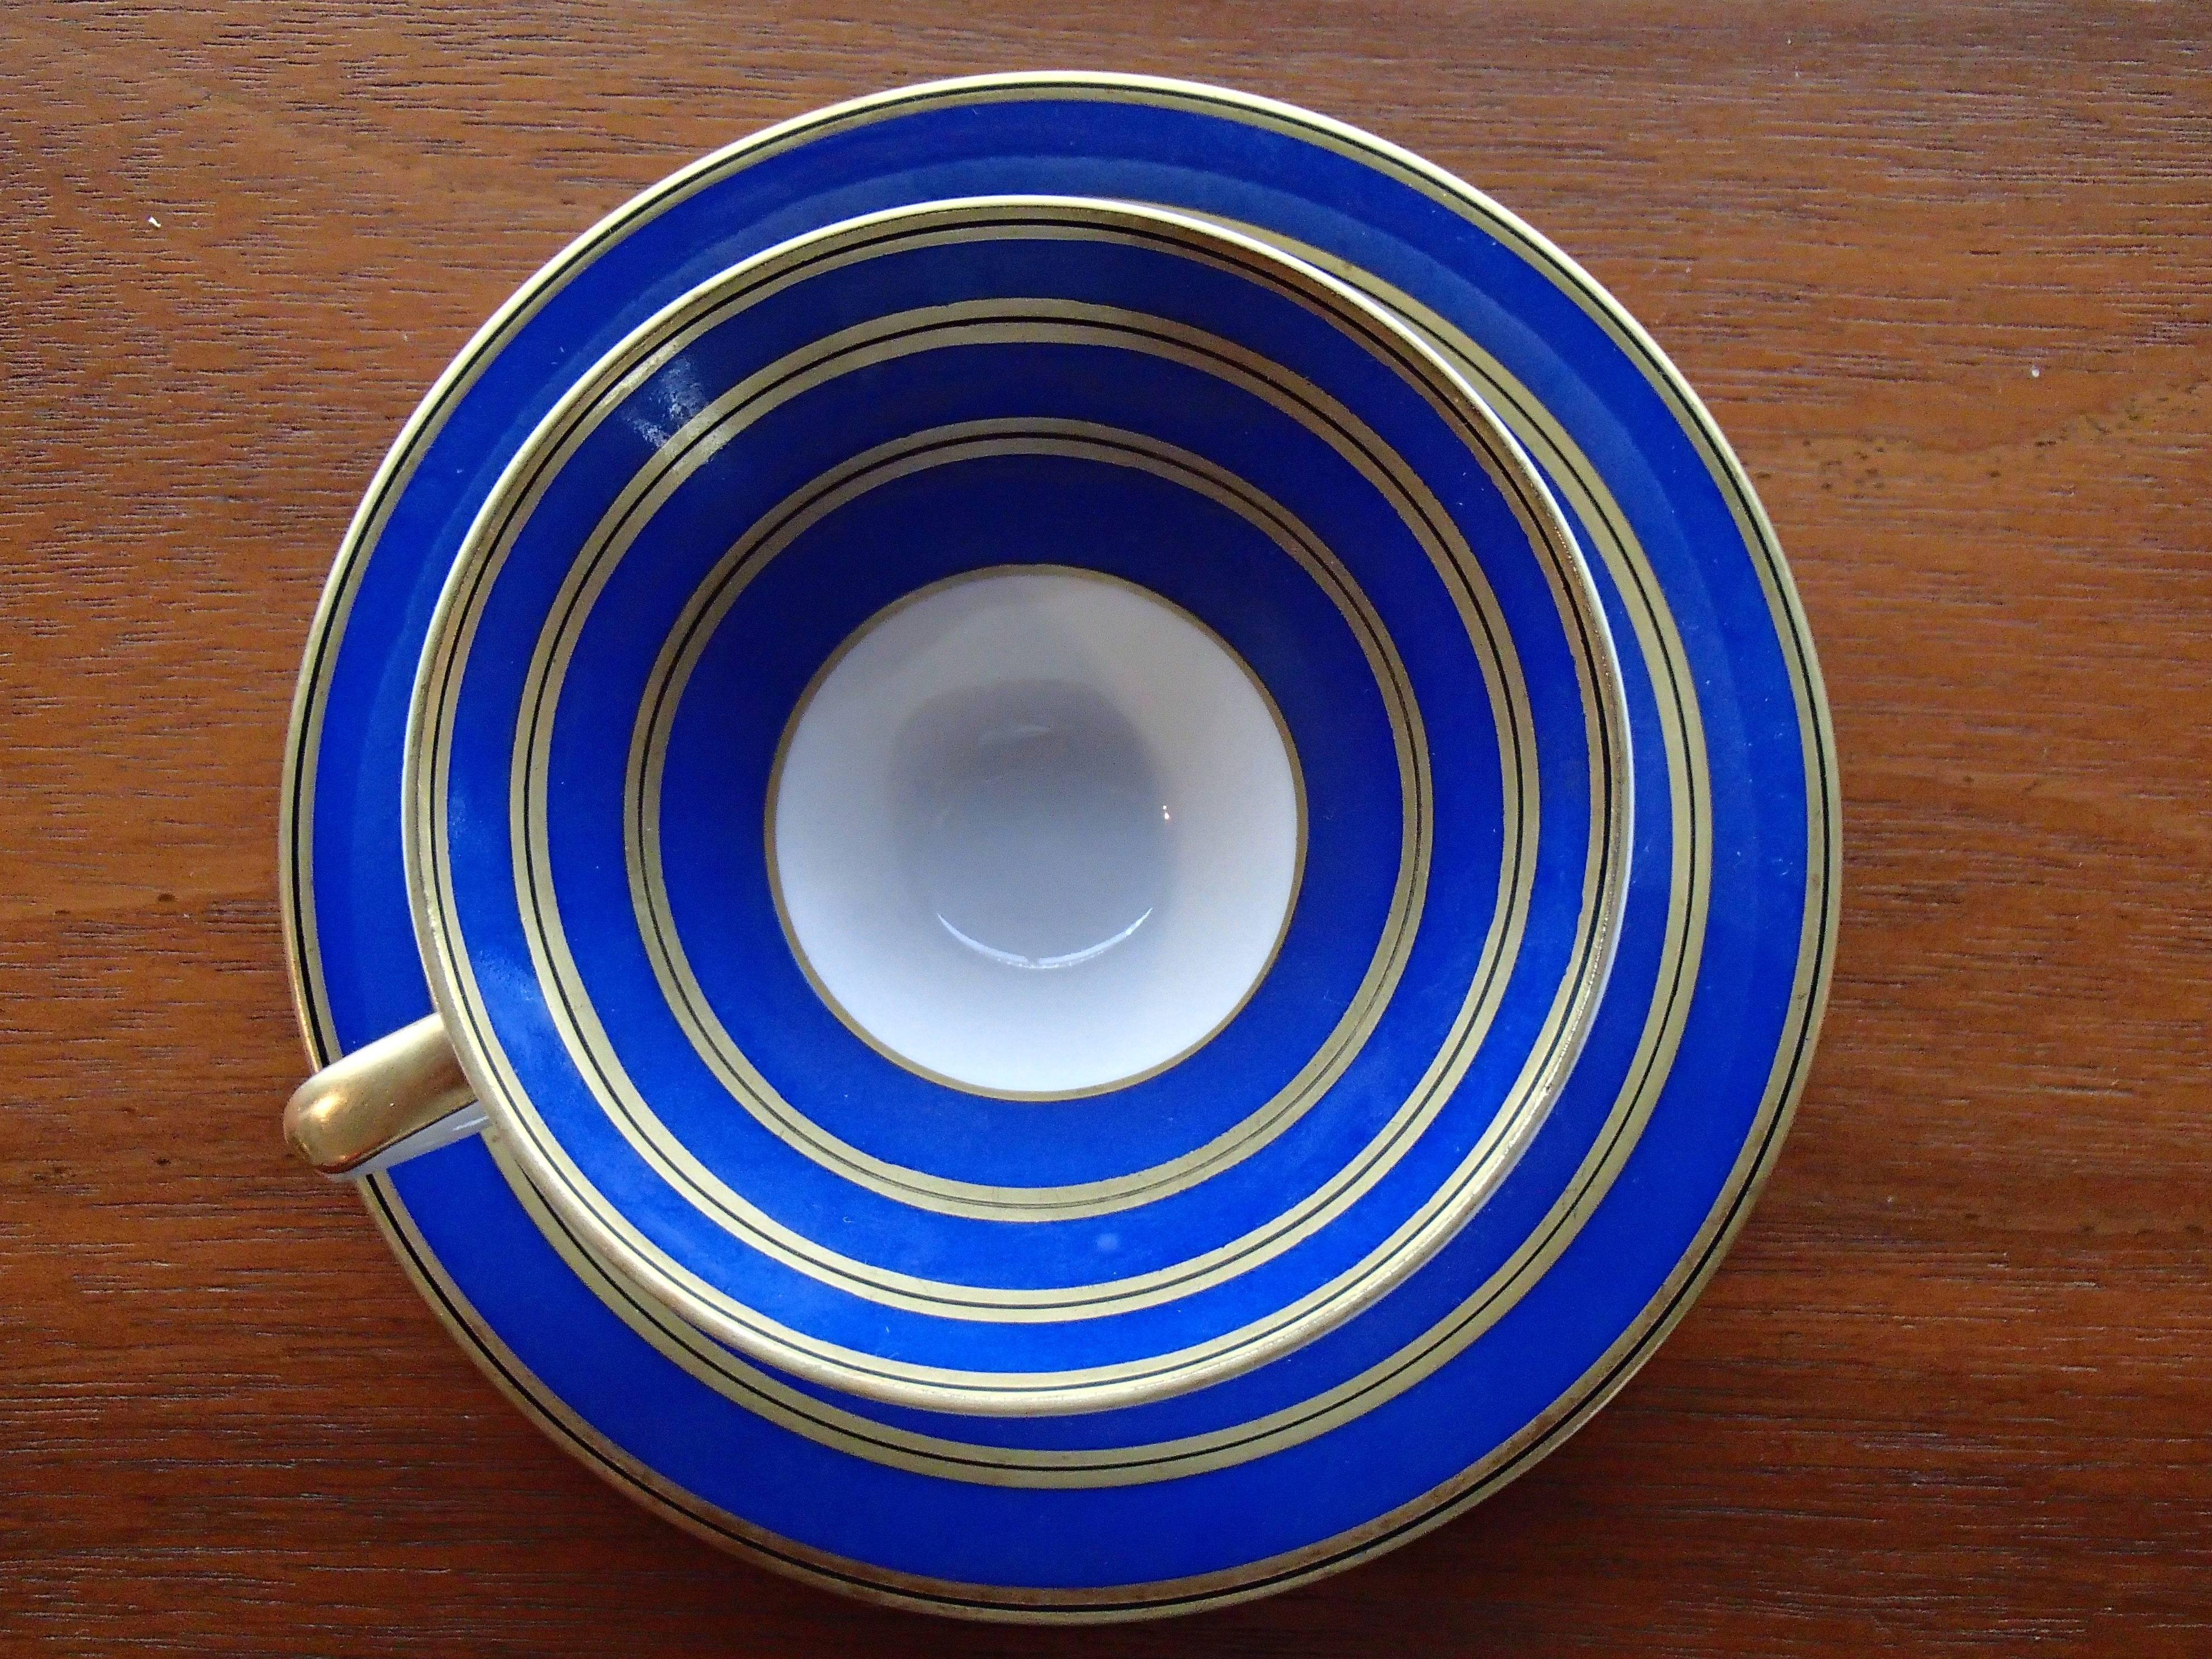 20th century coffee cup and sauces 
Bavaria cobalt blue/gold Johan Seltmann Vohenstrauss Modelnr. 4537 in perfect condition.